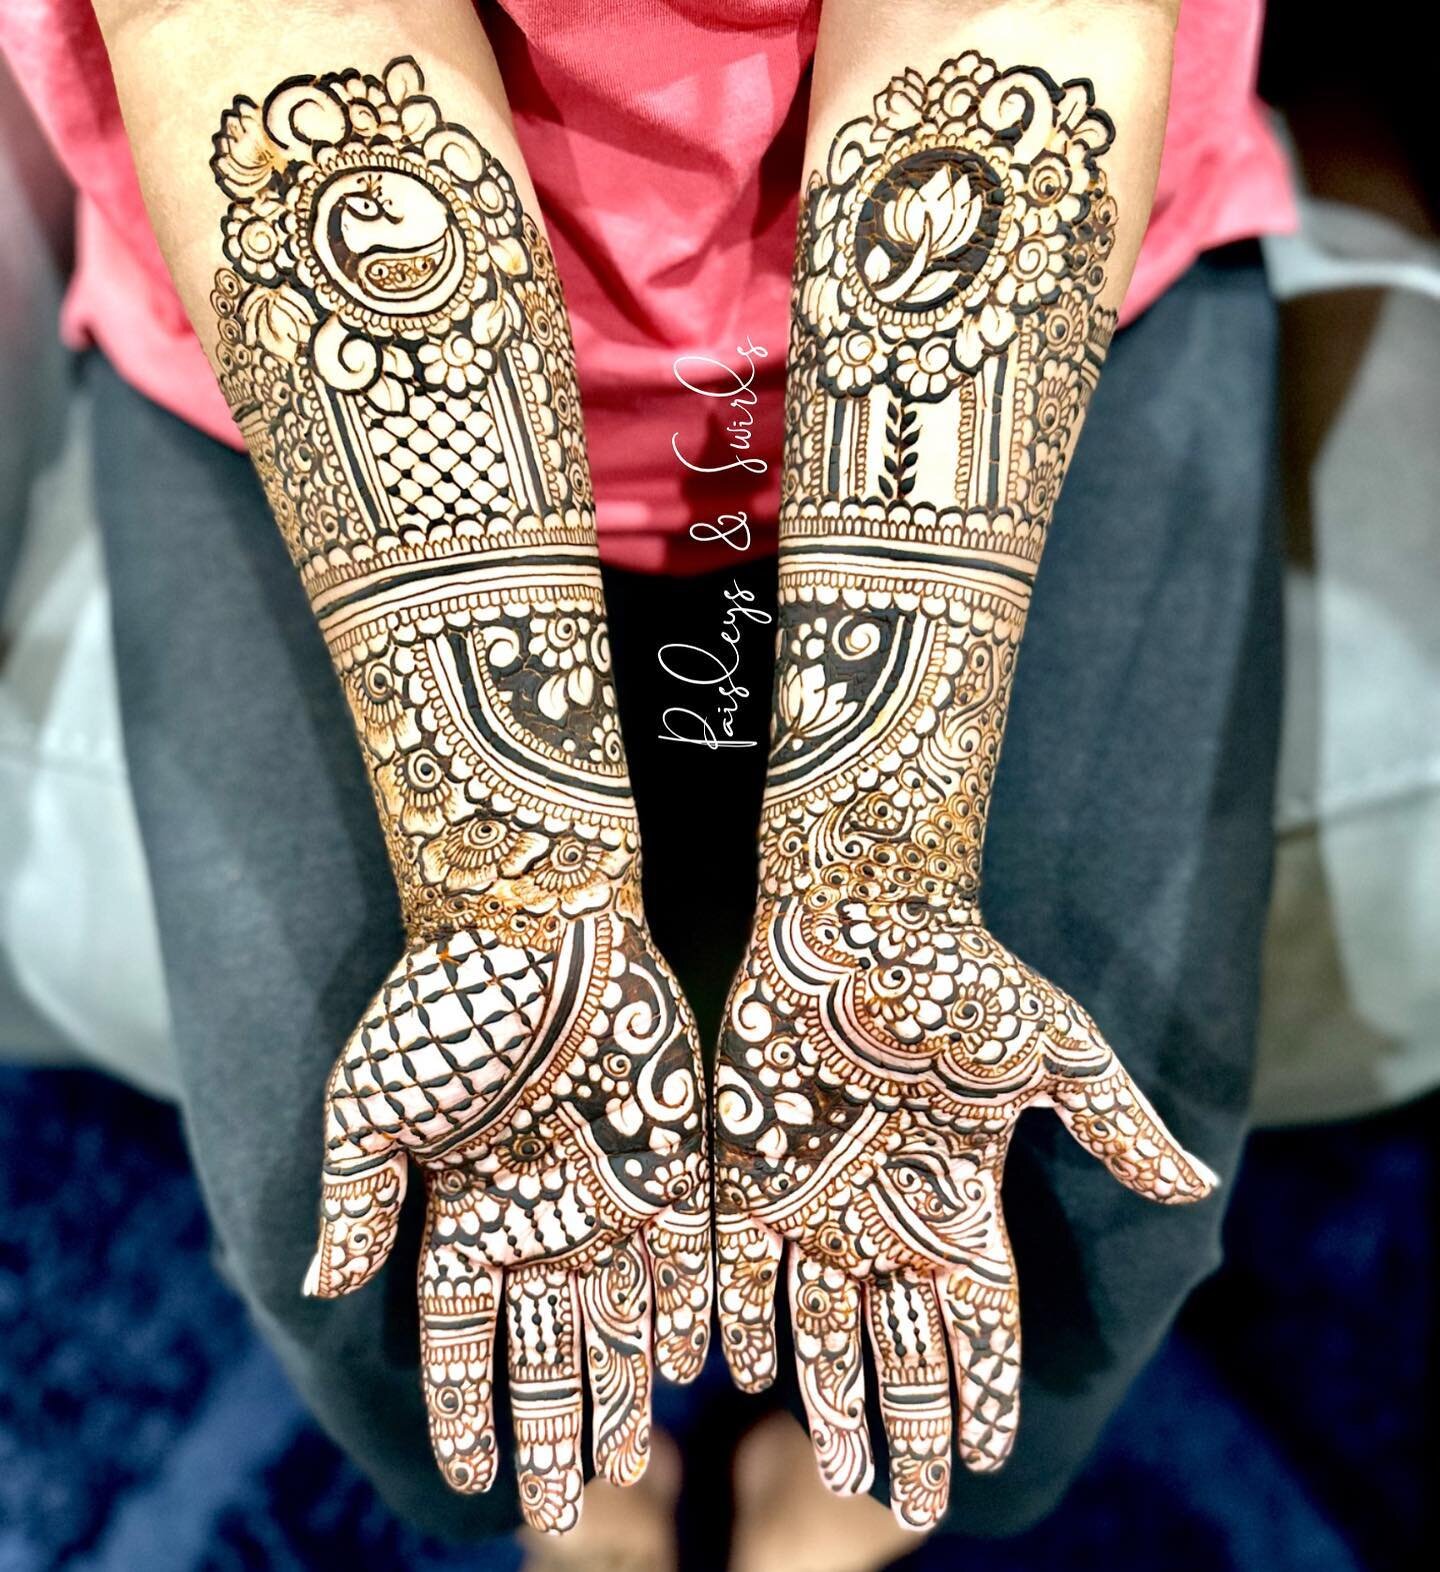 Bridal Henna for Pooja! A fun two days of work combined with a little singing in the background from Love is Blind in the :) 
.
.
.
.
.
#houstonprofessionalhenna #houstonhenna #houstonmehndiartist #houstonmehndi #houstonhennaartist #texashenna #brida